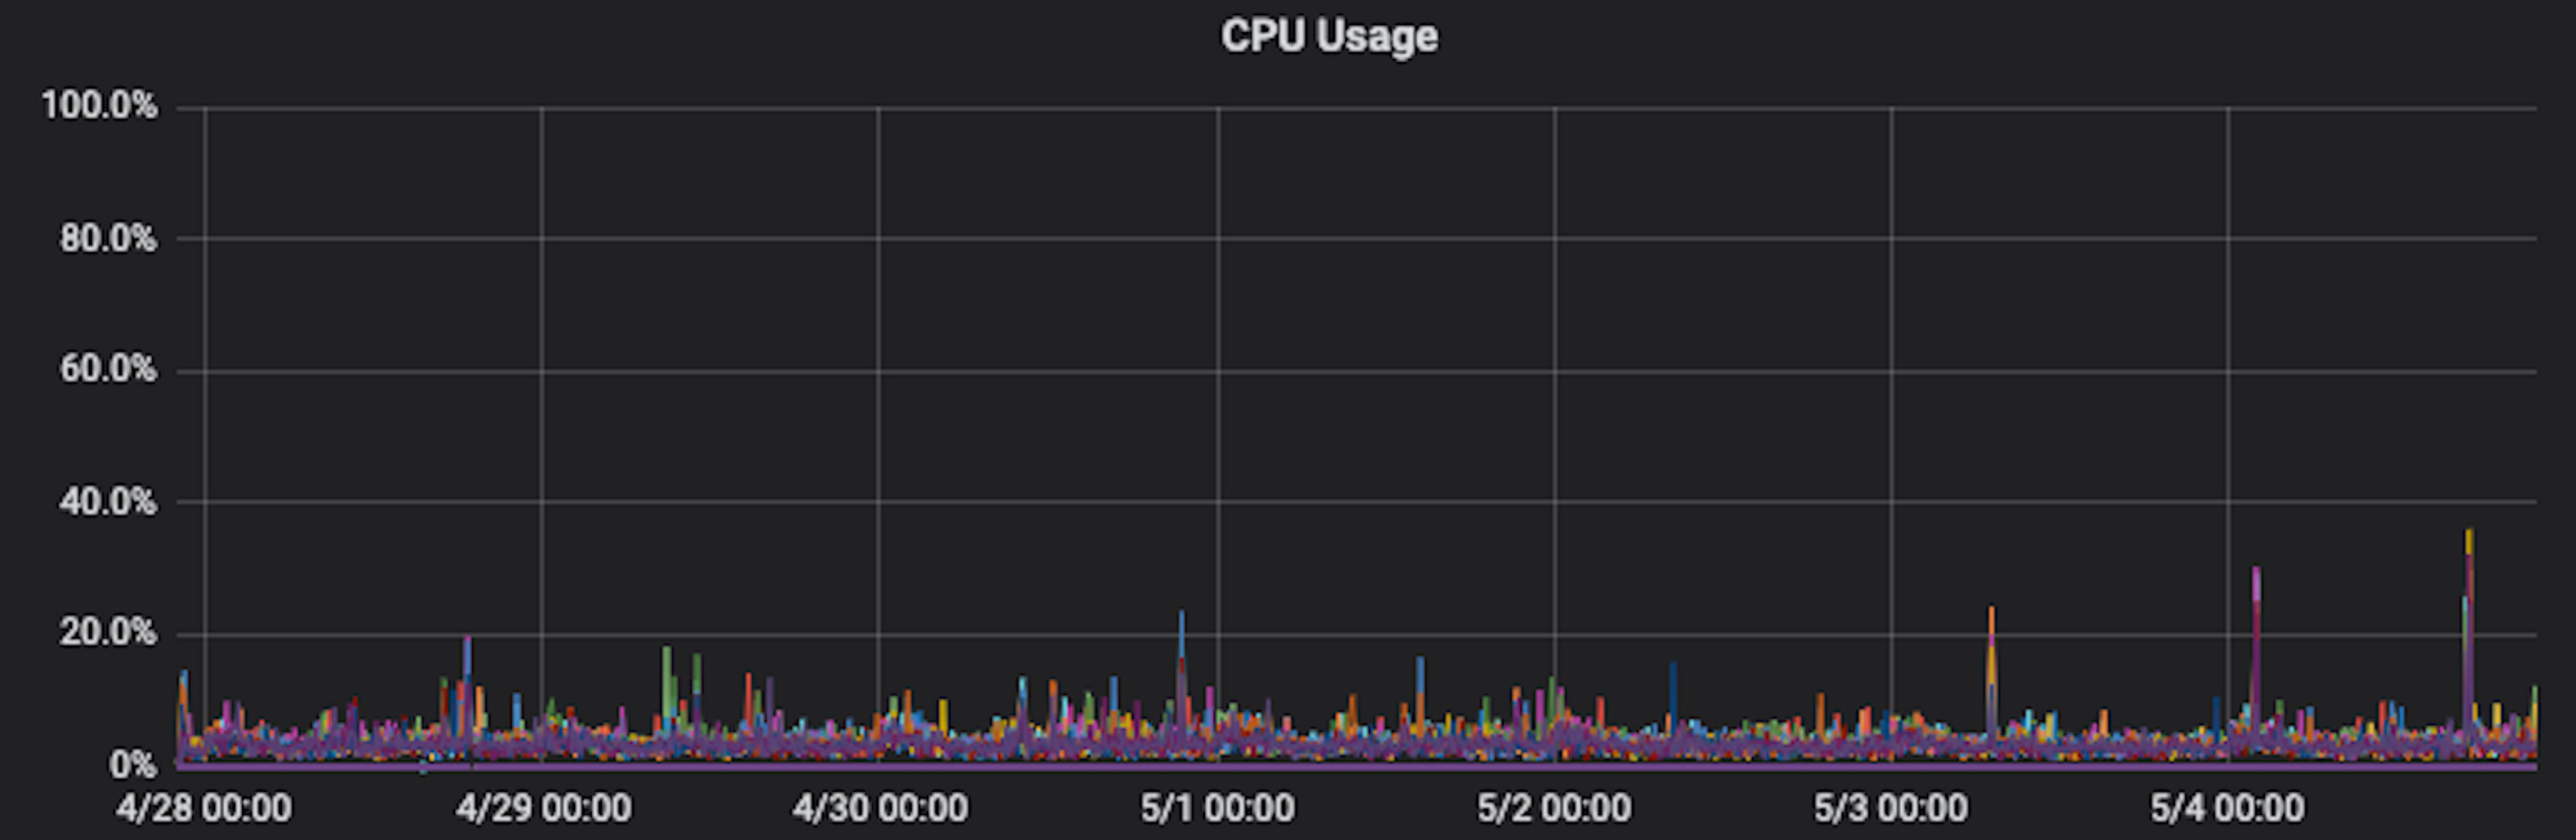 Flat CPU Usage in the Steady State